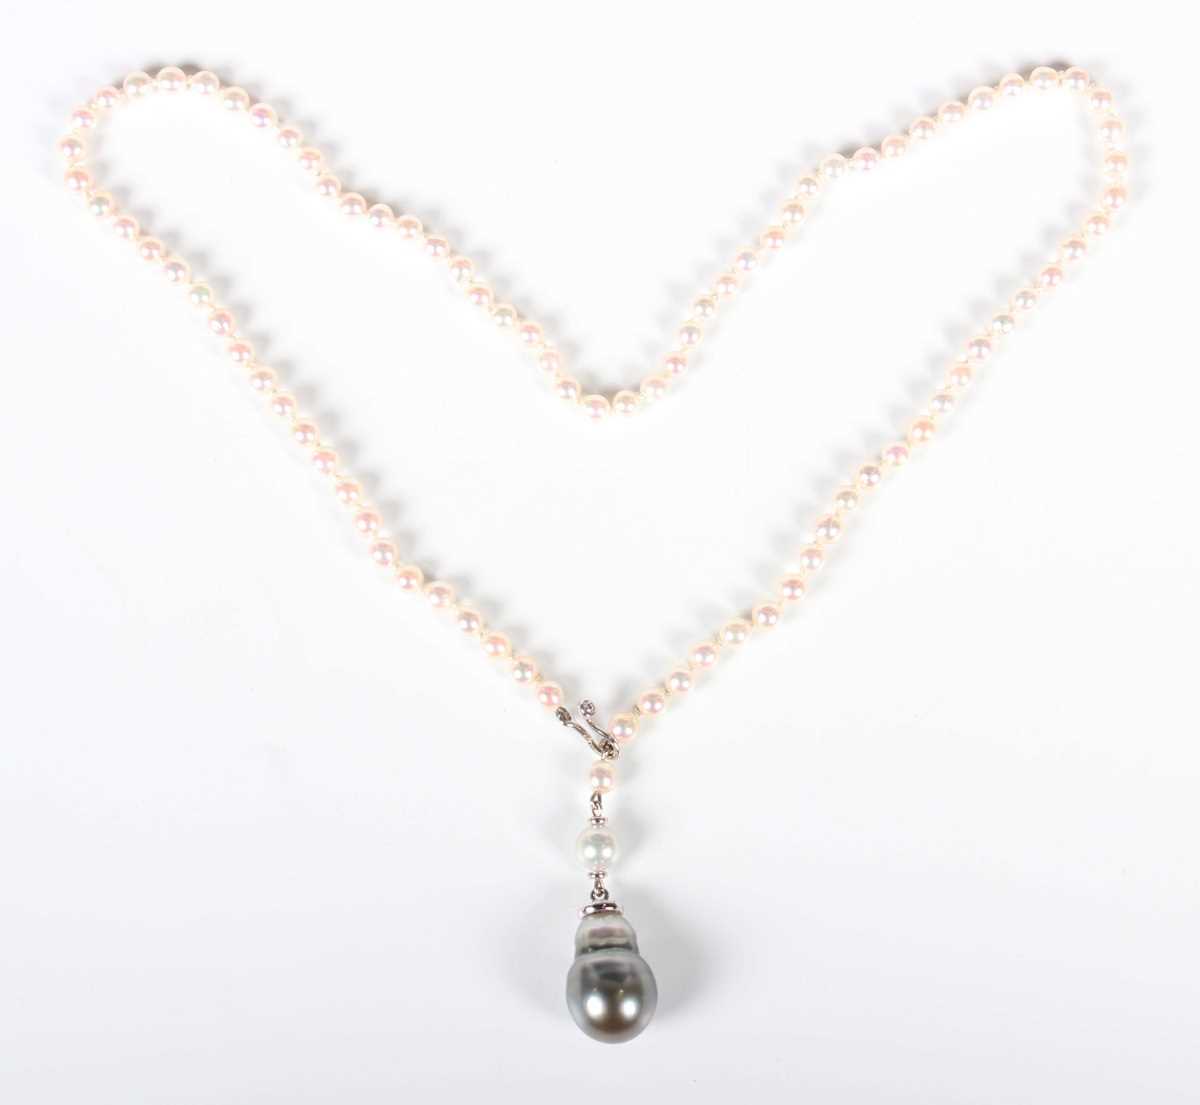 A single row necklace of cultured pearls with a diamond capped Tahitian grey tinted cultured pearl - Image 2 of 3